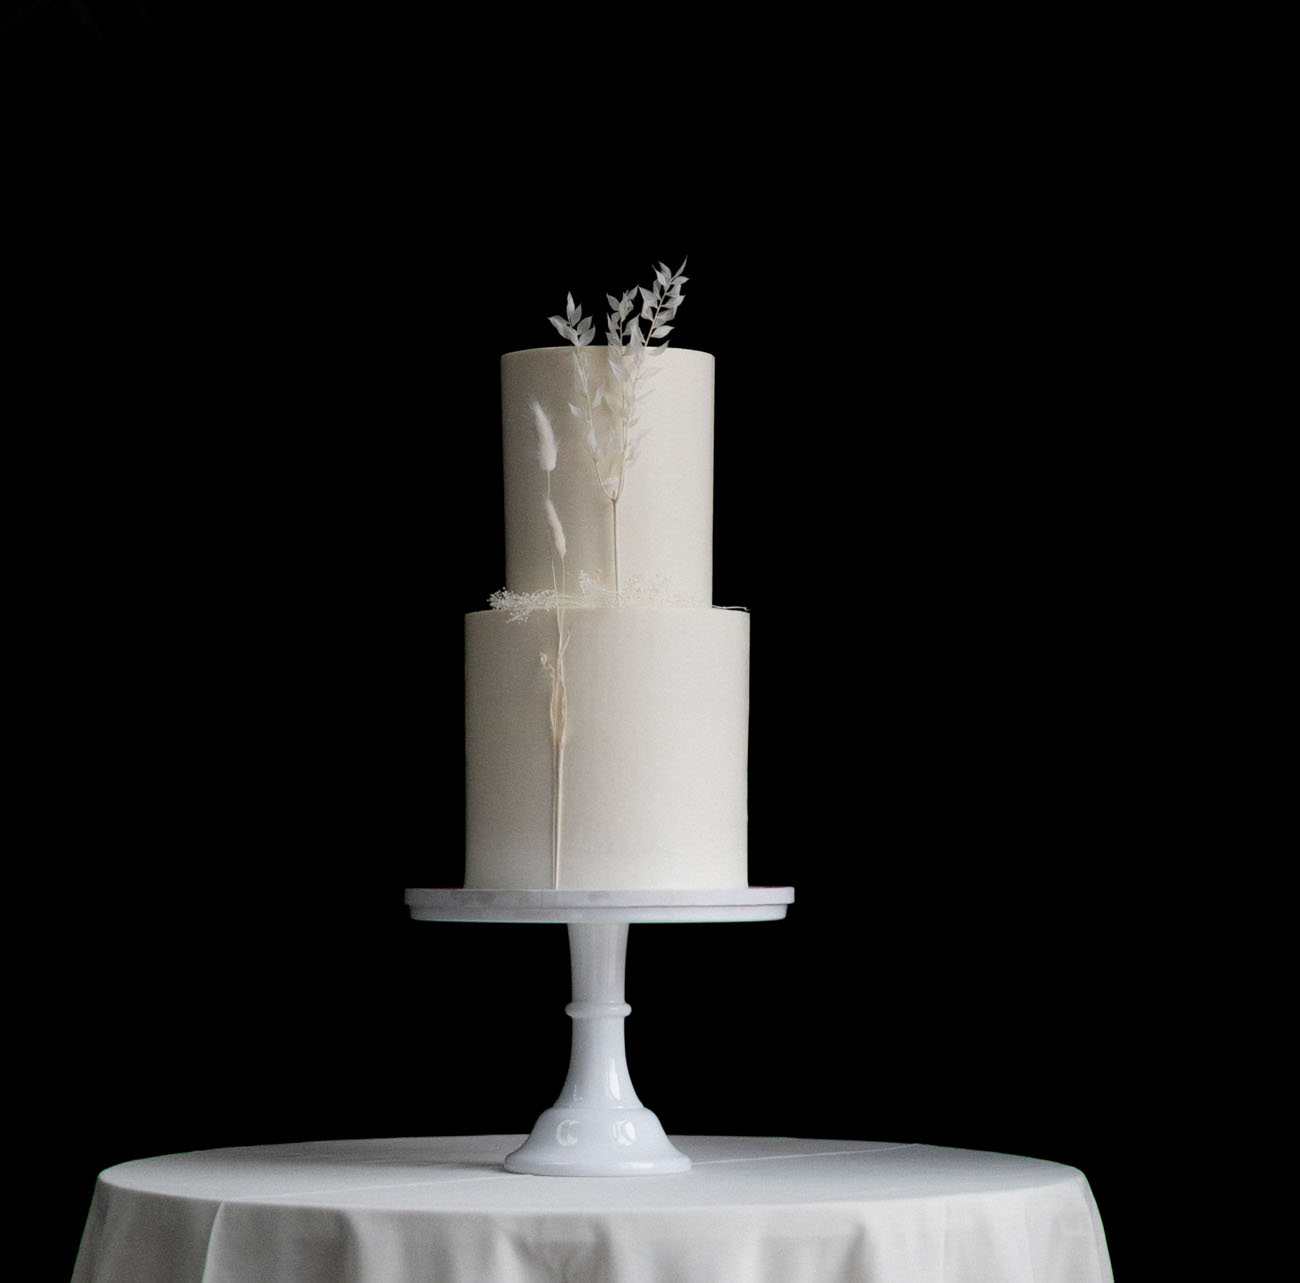 The wedding cake was a pure white one, with some white dried blooms on it